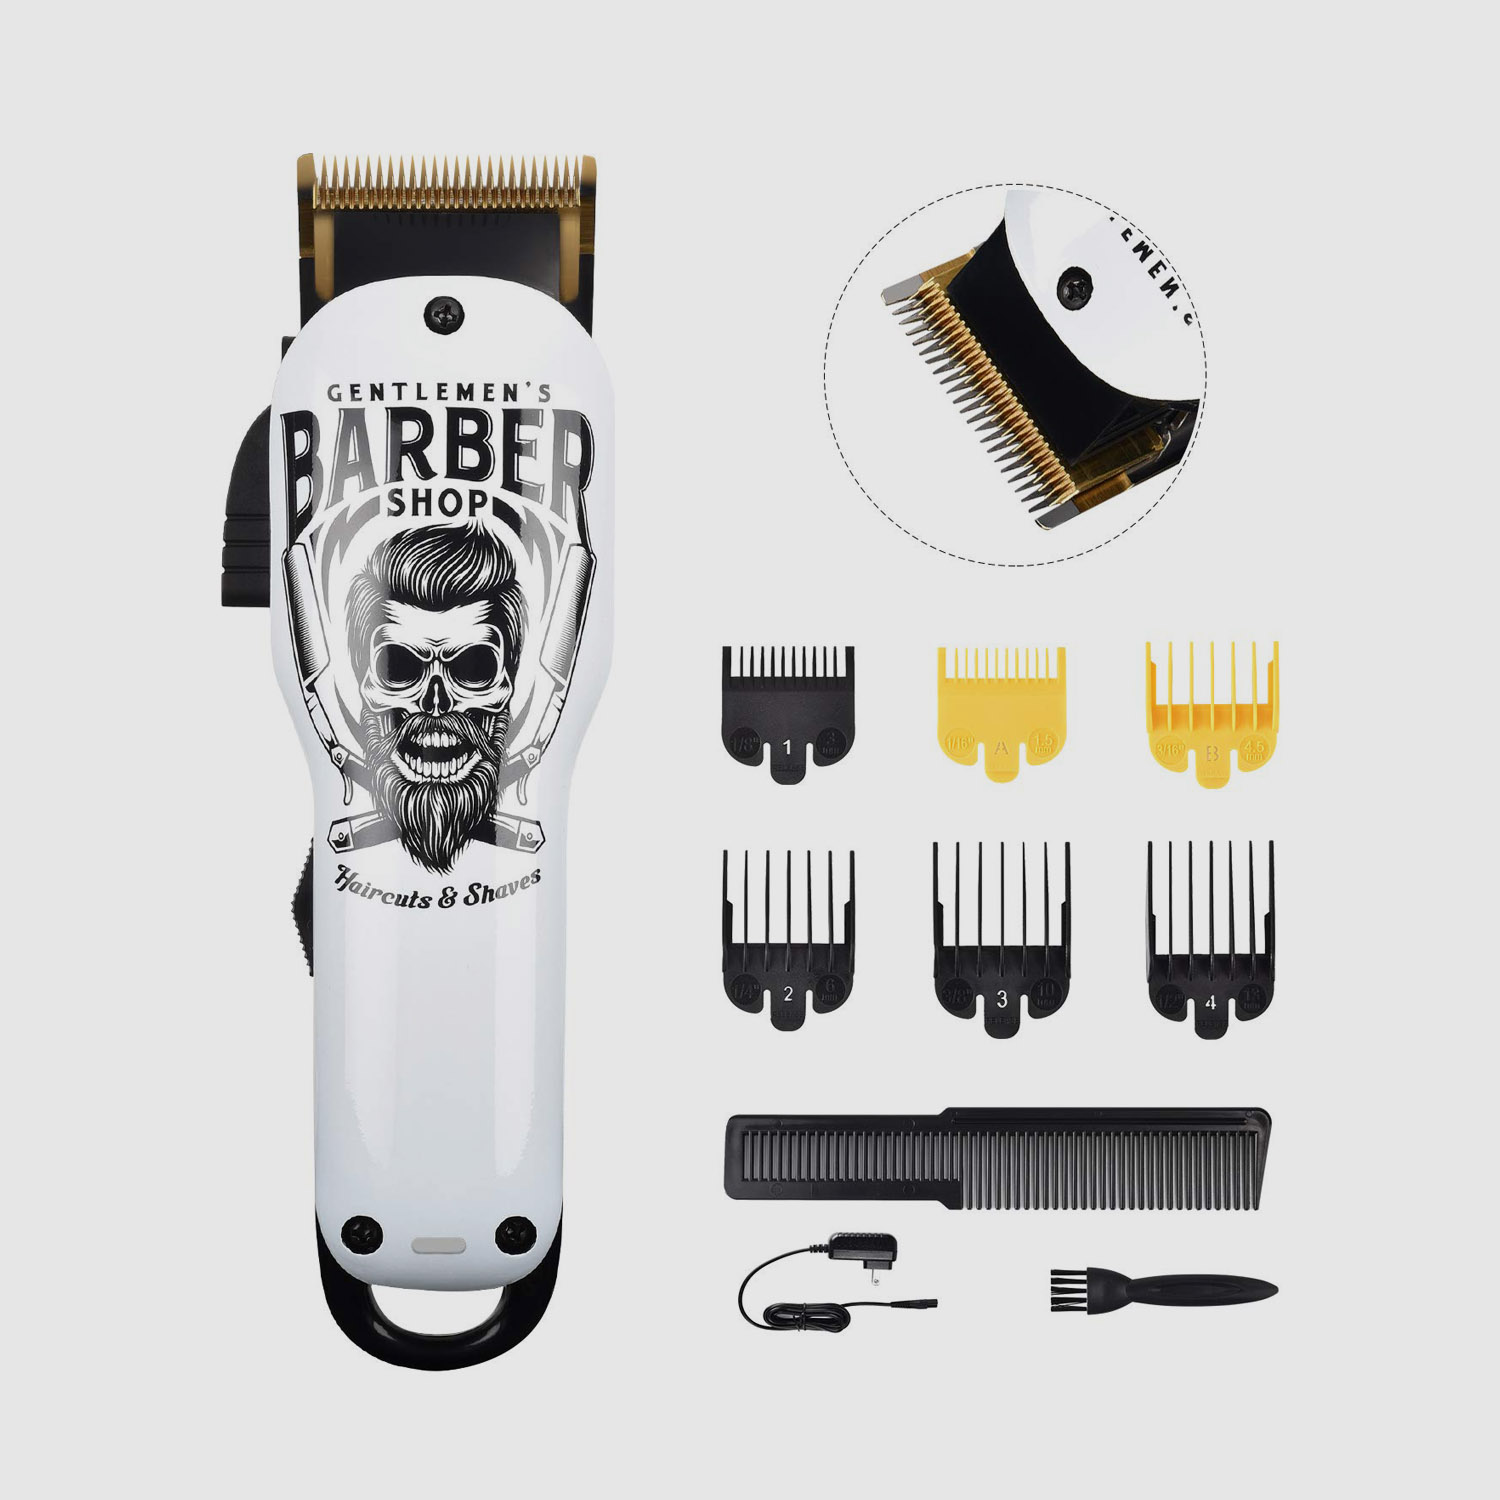 Professional Cordless Haircut Kit Rechargeable 2000mAh with 6 Guide Combs